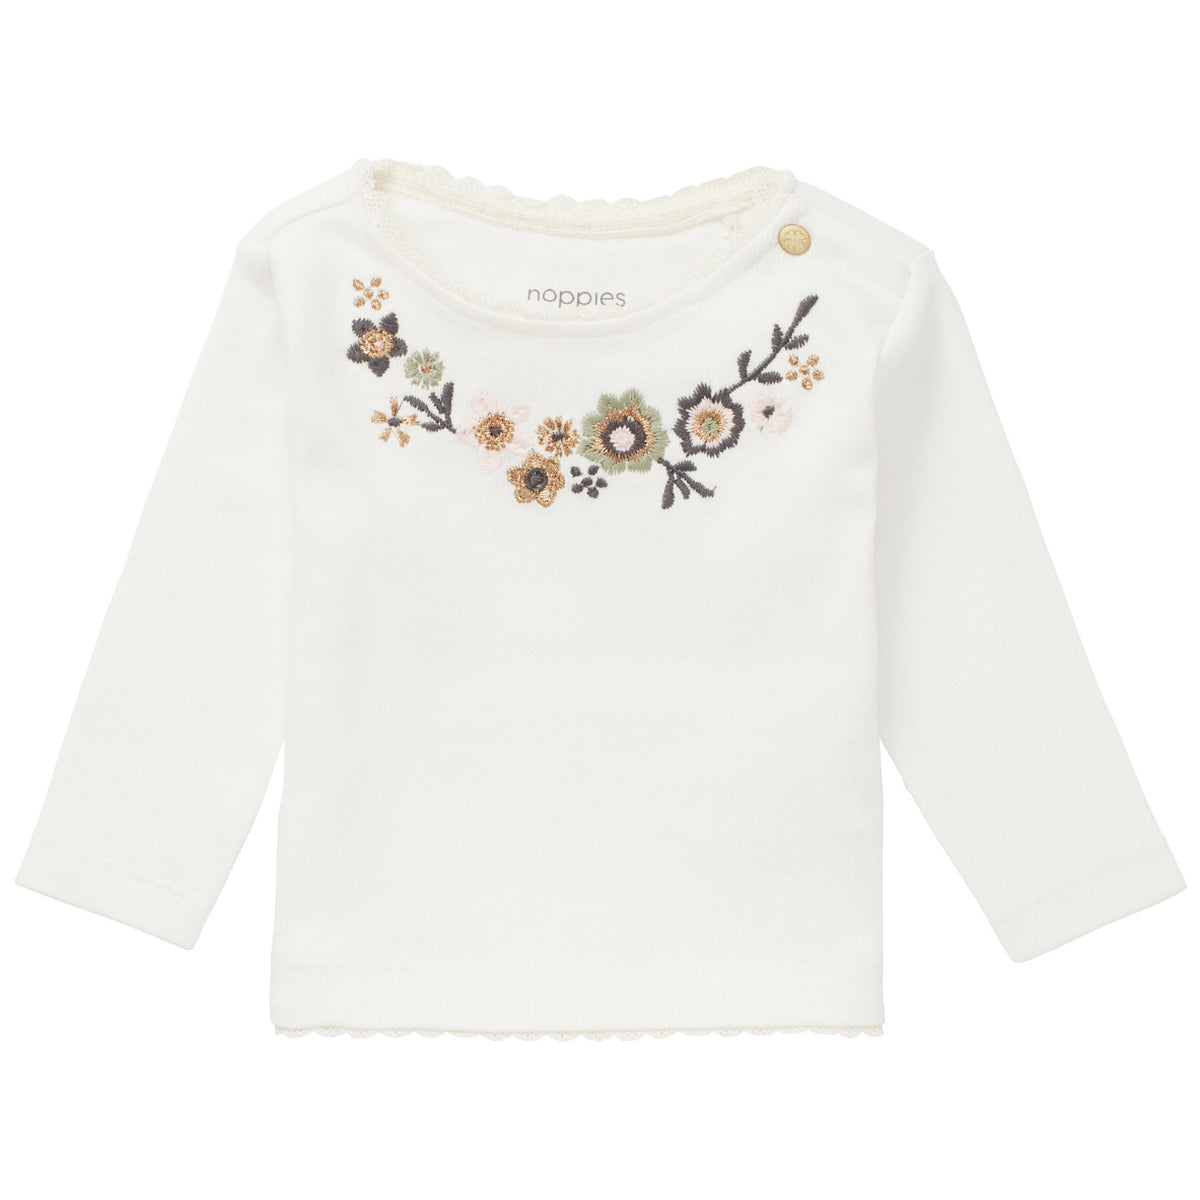 White Longsleeve with Floral Embroidery